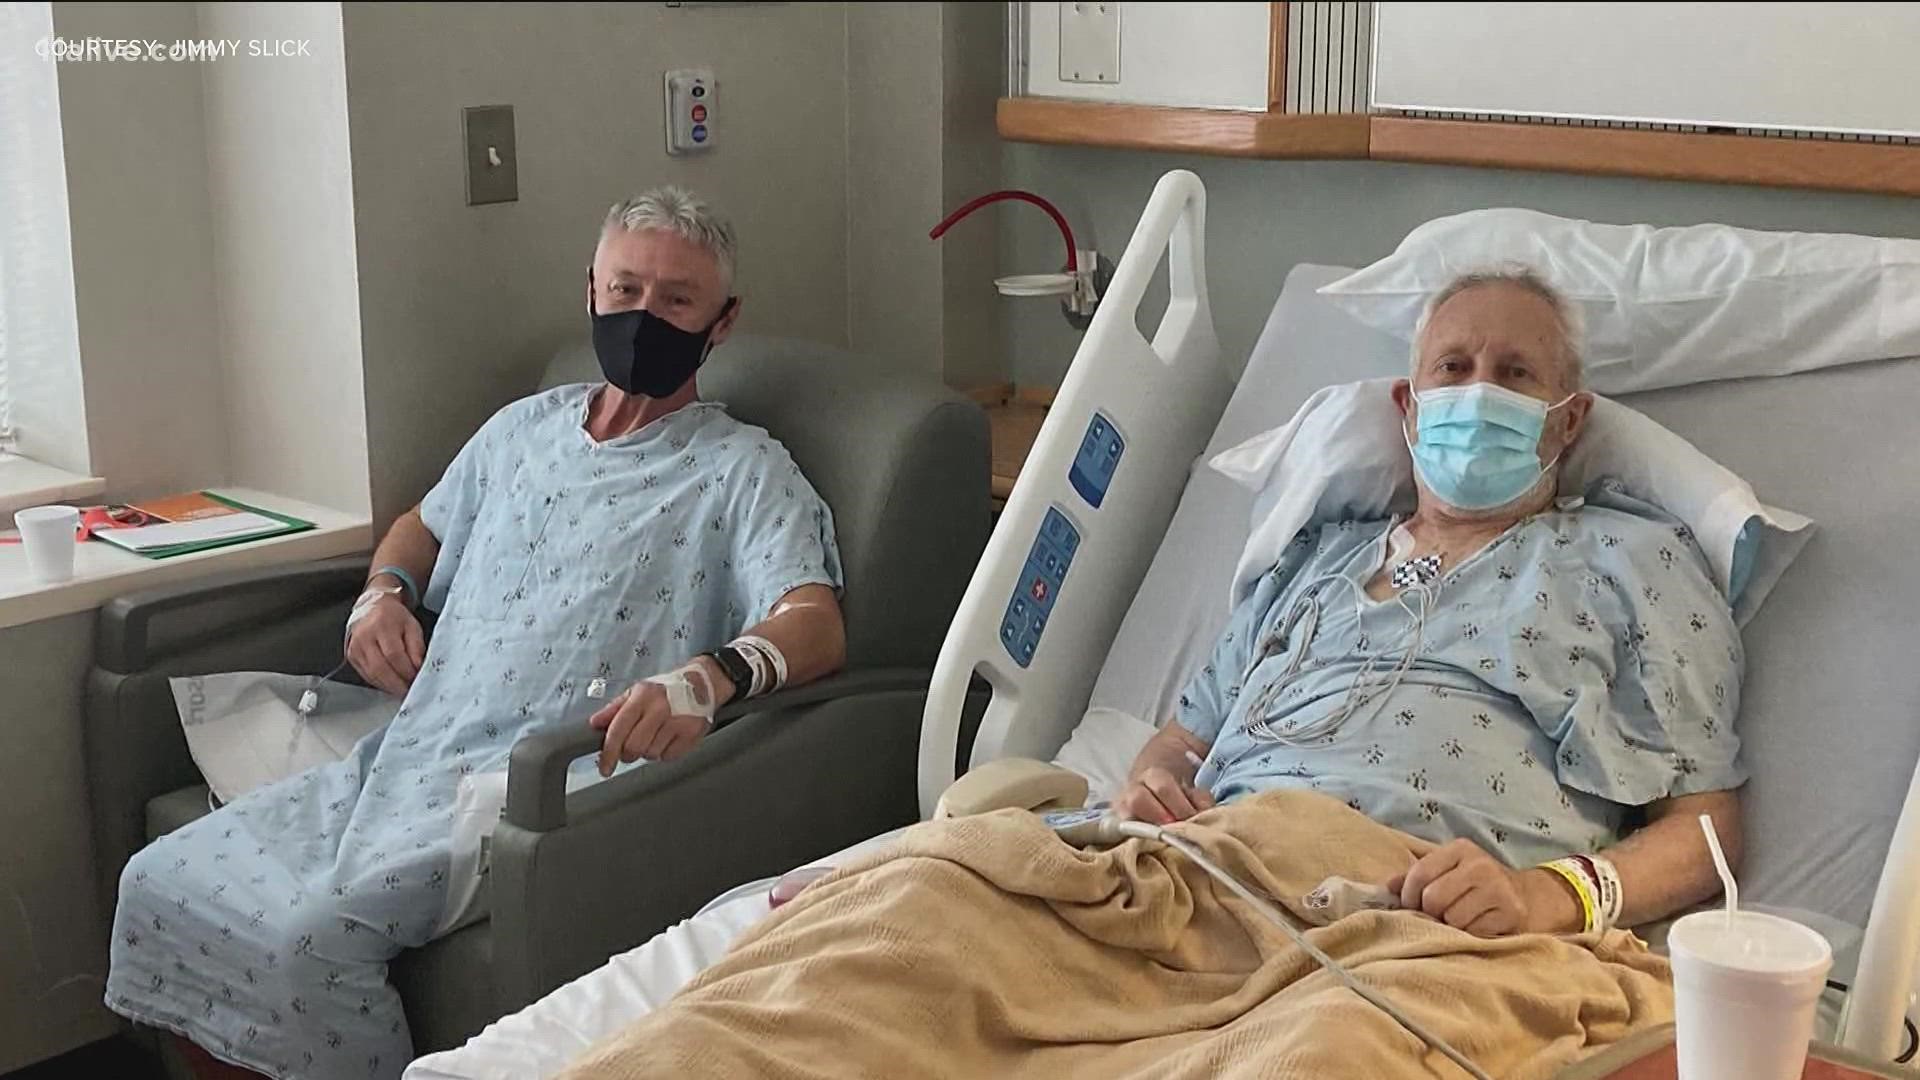 "I was having lunch with Jimmy," he said when questions about his kidney came up. "He said like it was talking about the weather, 'I'll give you one of my kidneys.'"